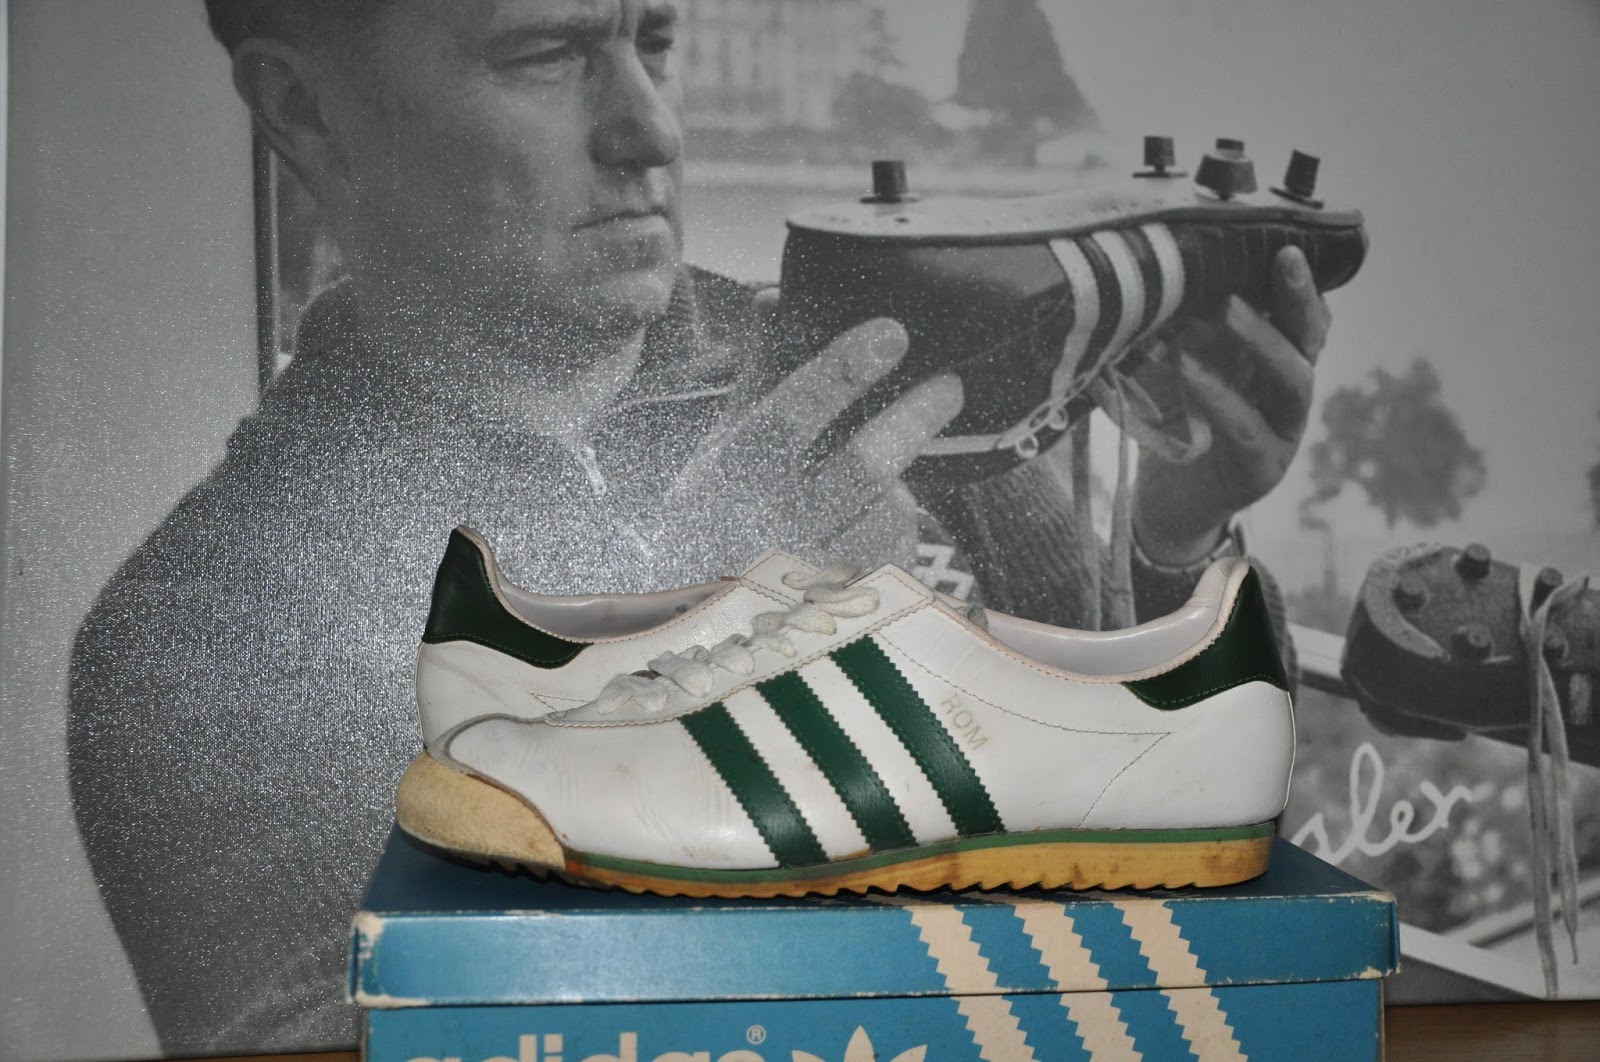 adidas shoes from which country